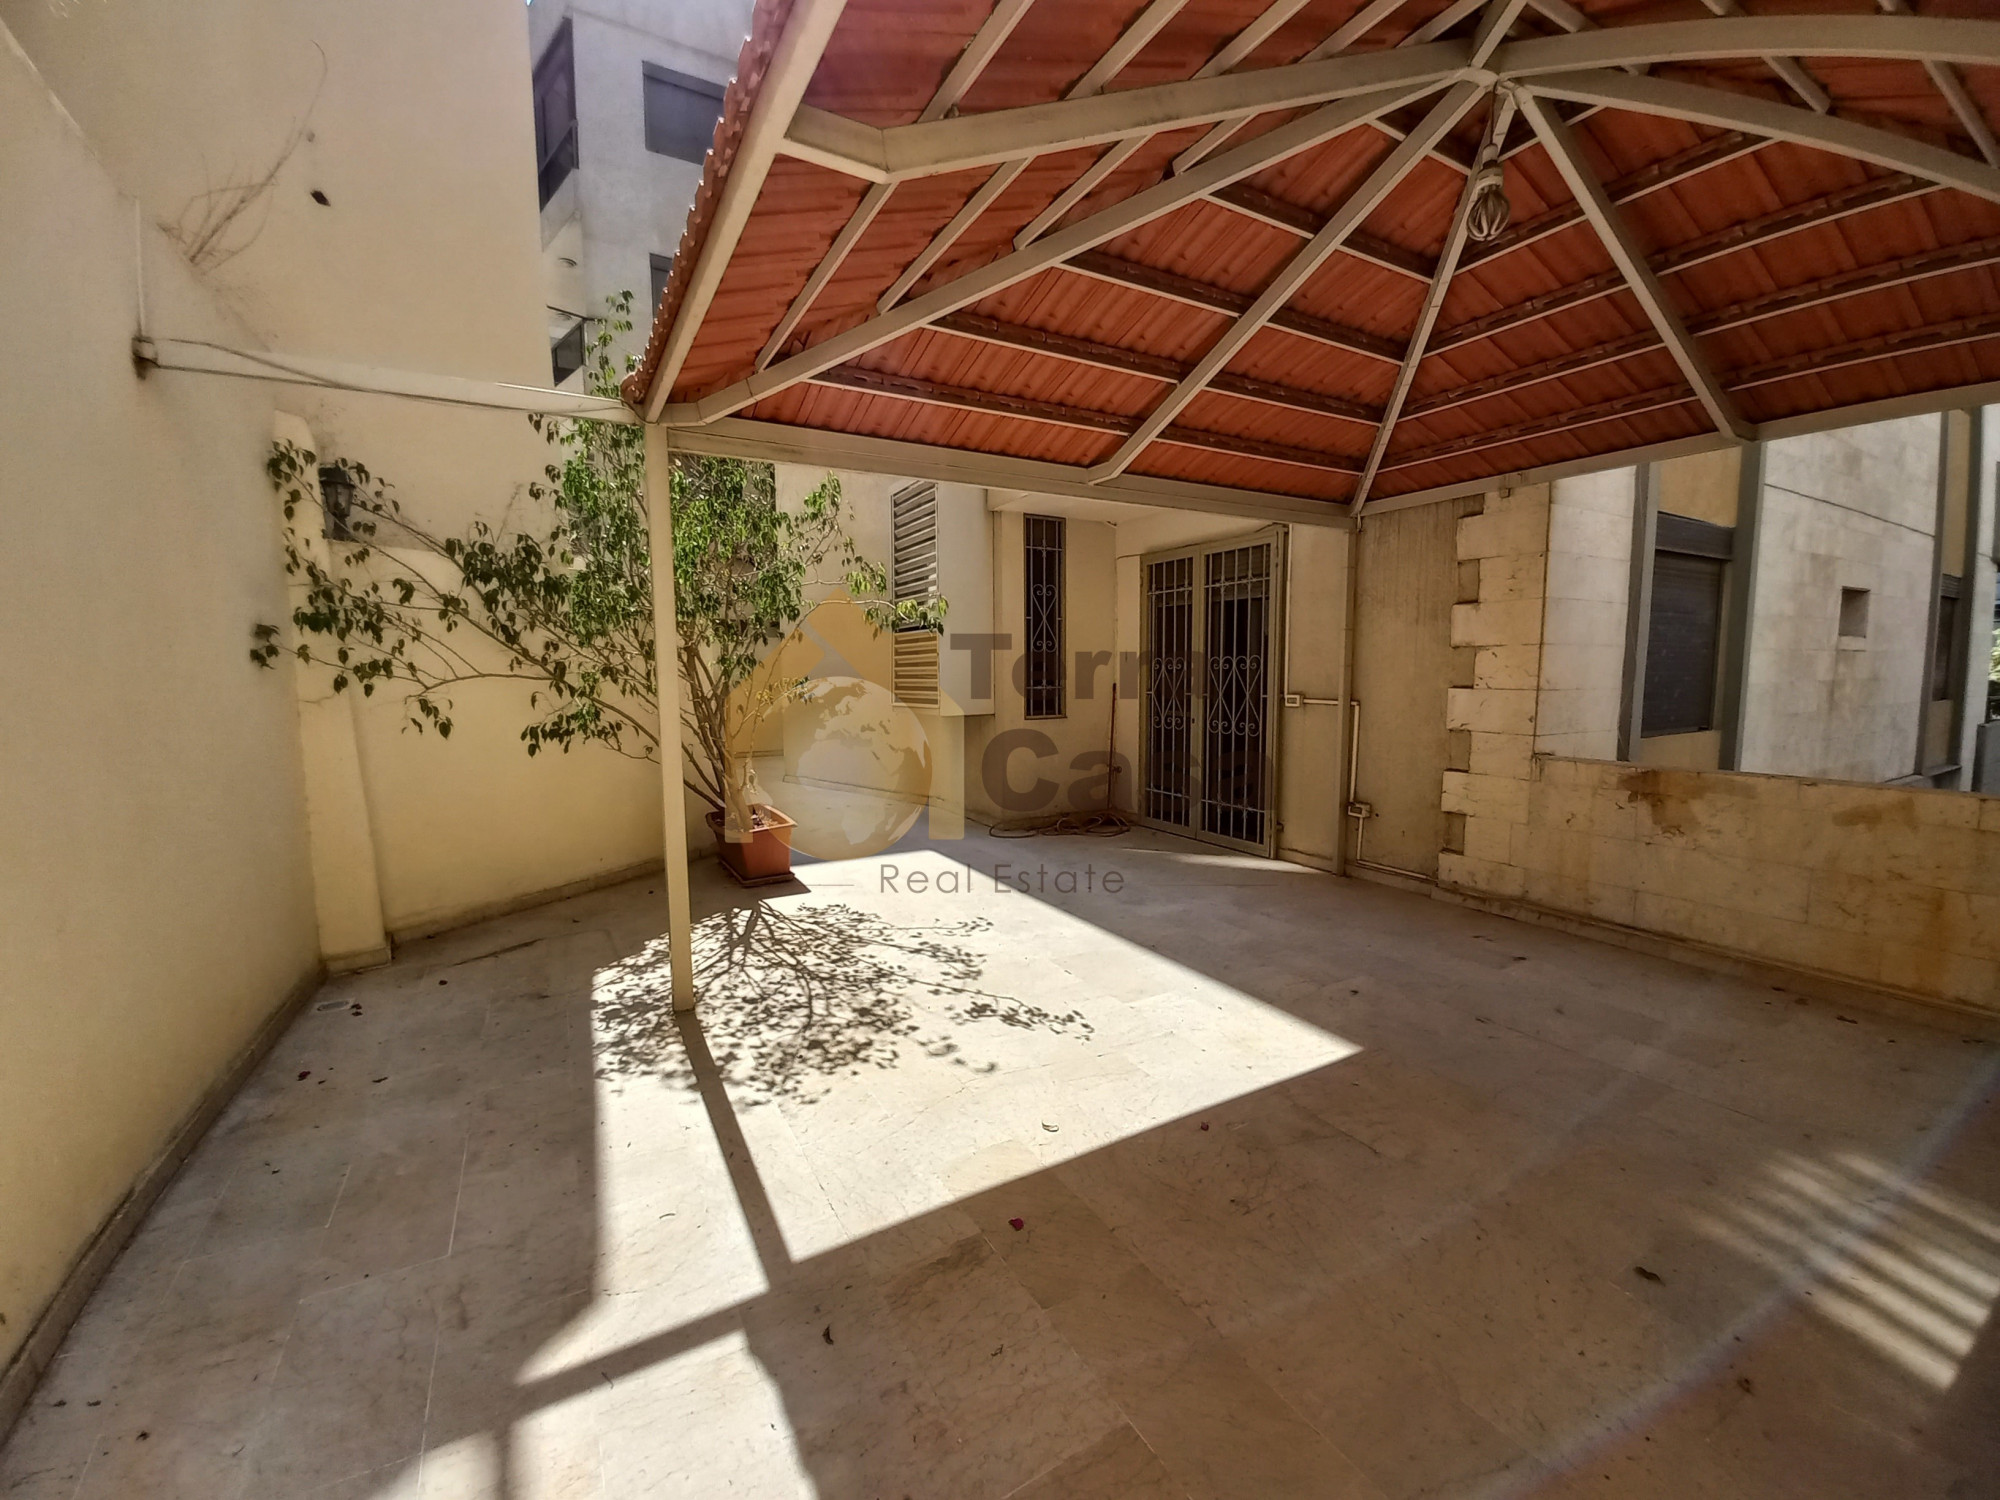 Apartment with terrace for sale in Mar Takla